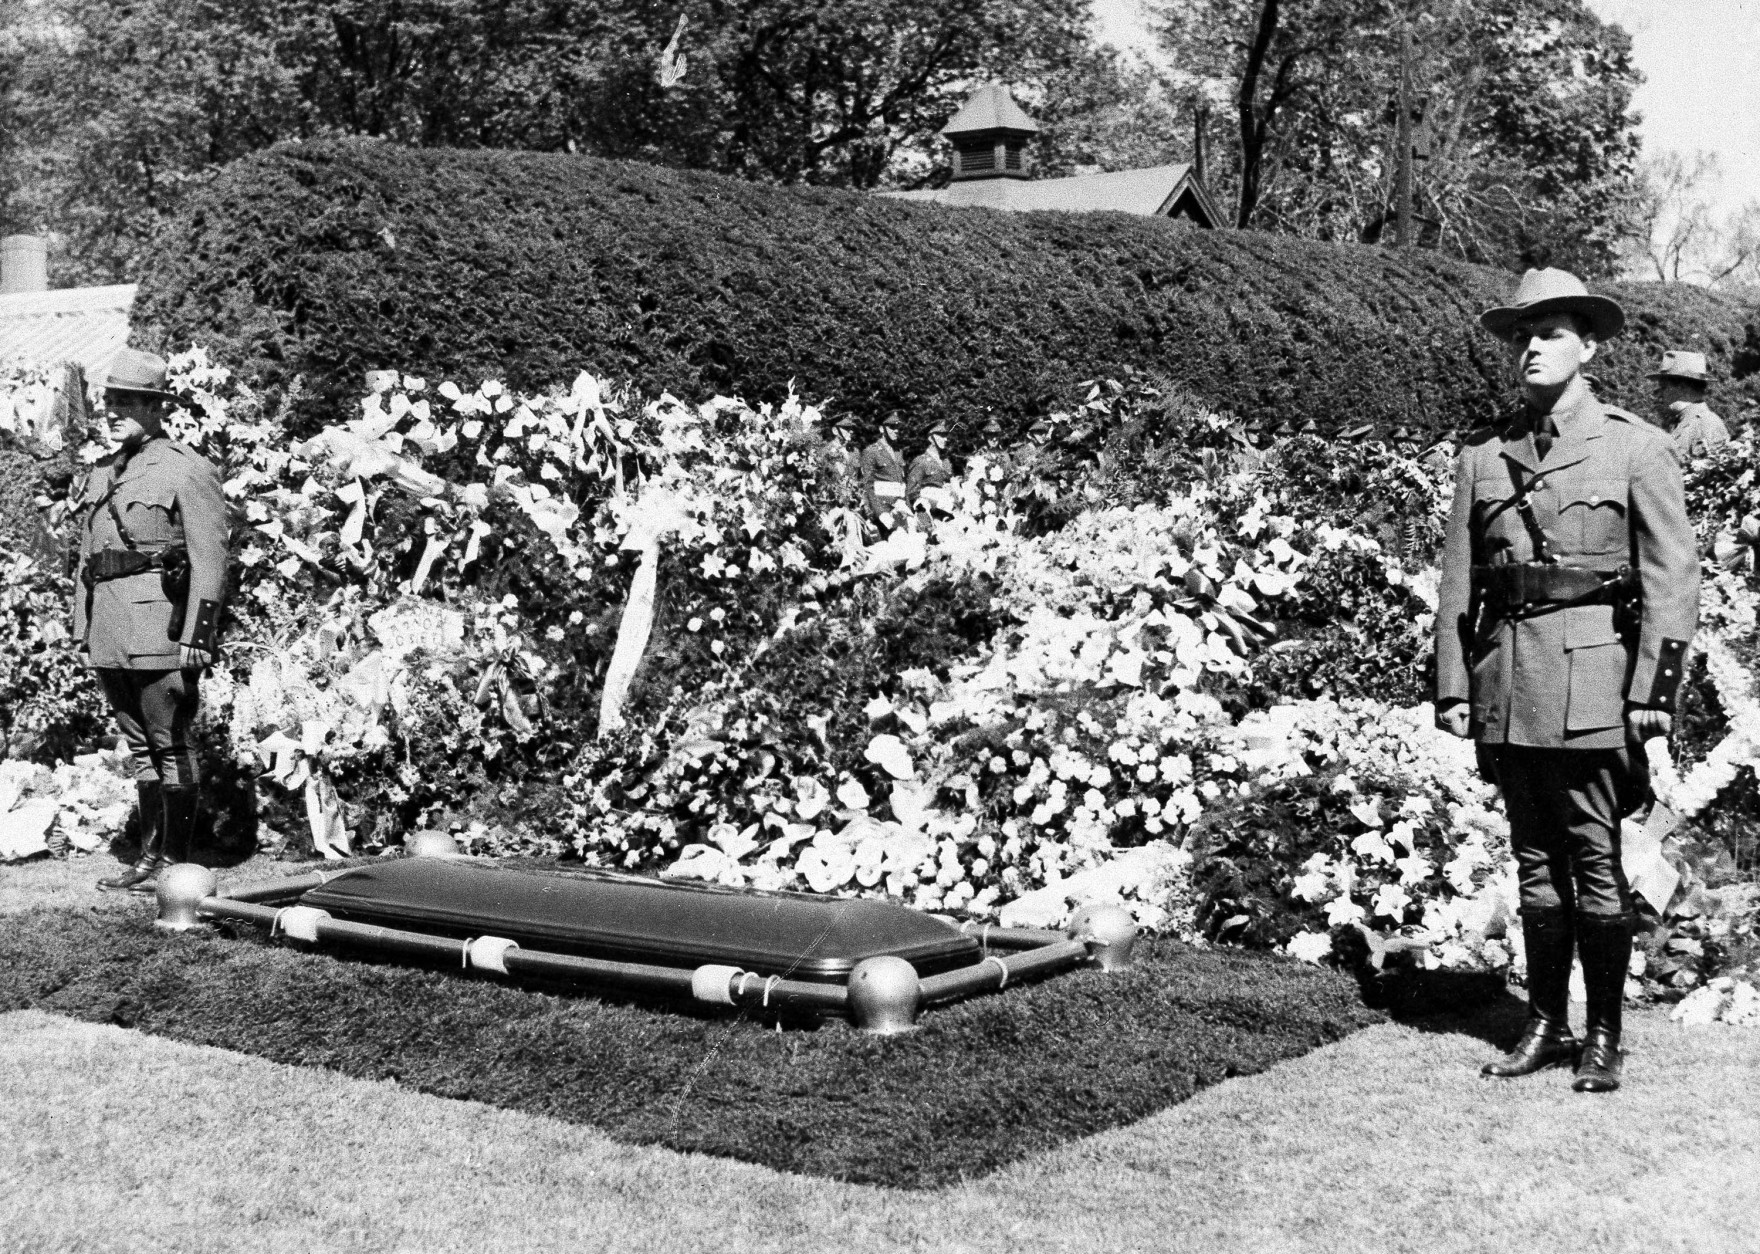 New York State Police guard the grave of President Franklin D. Roosevelt on his estate at Hyde Park, N.Y., April 15, 1945, following his funeral.  (AP Photo)